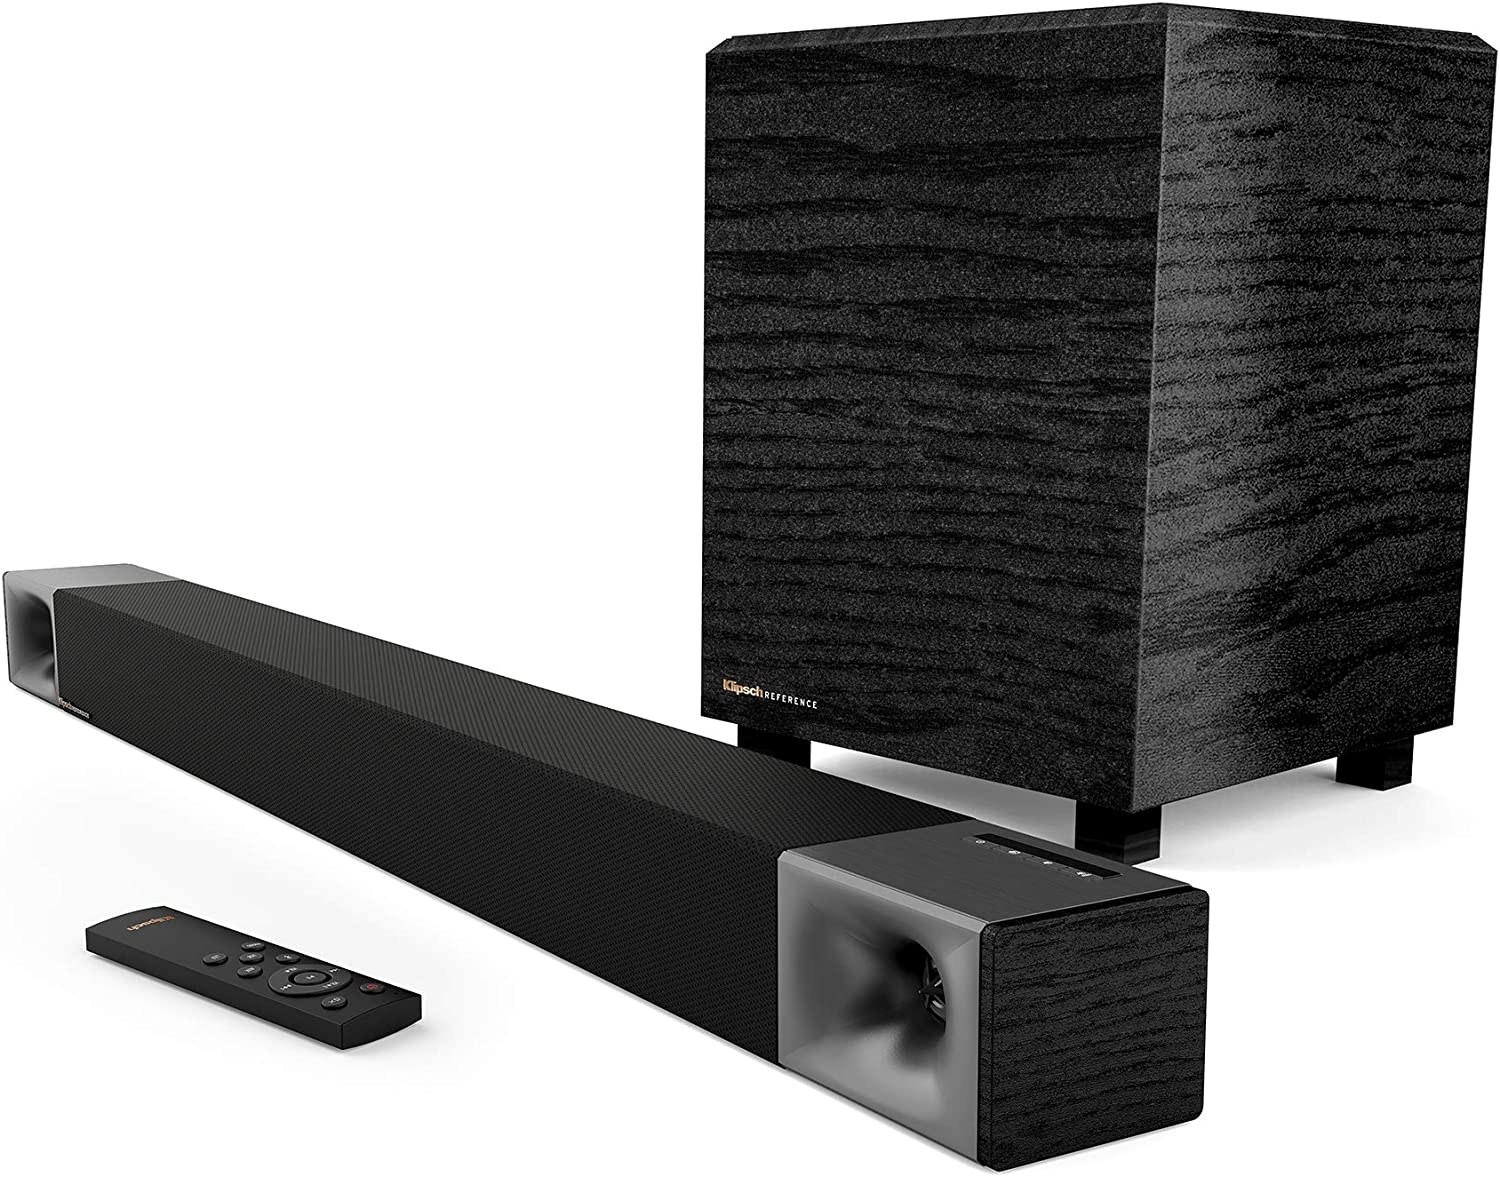 a product shot of the sound bar and woofer with a remote